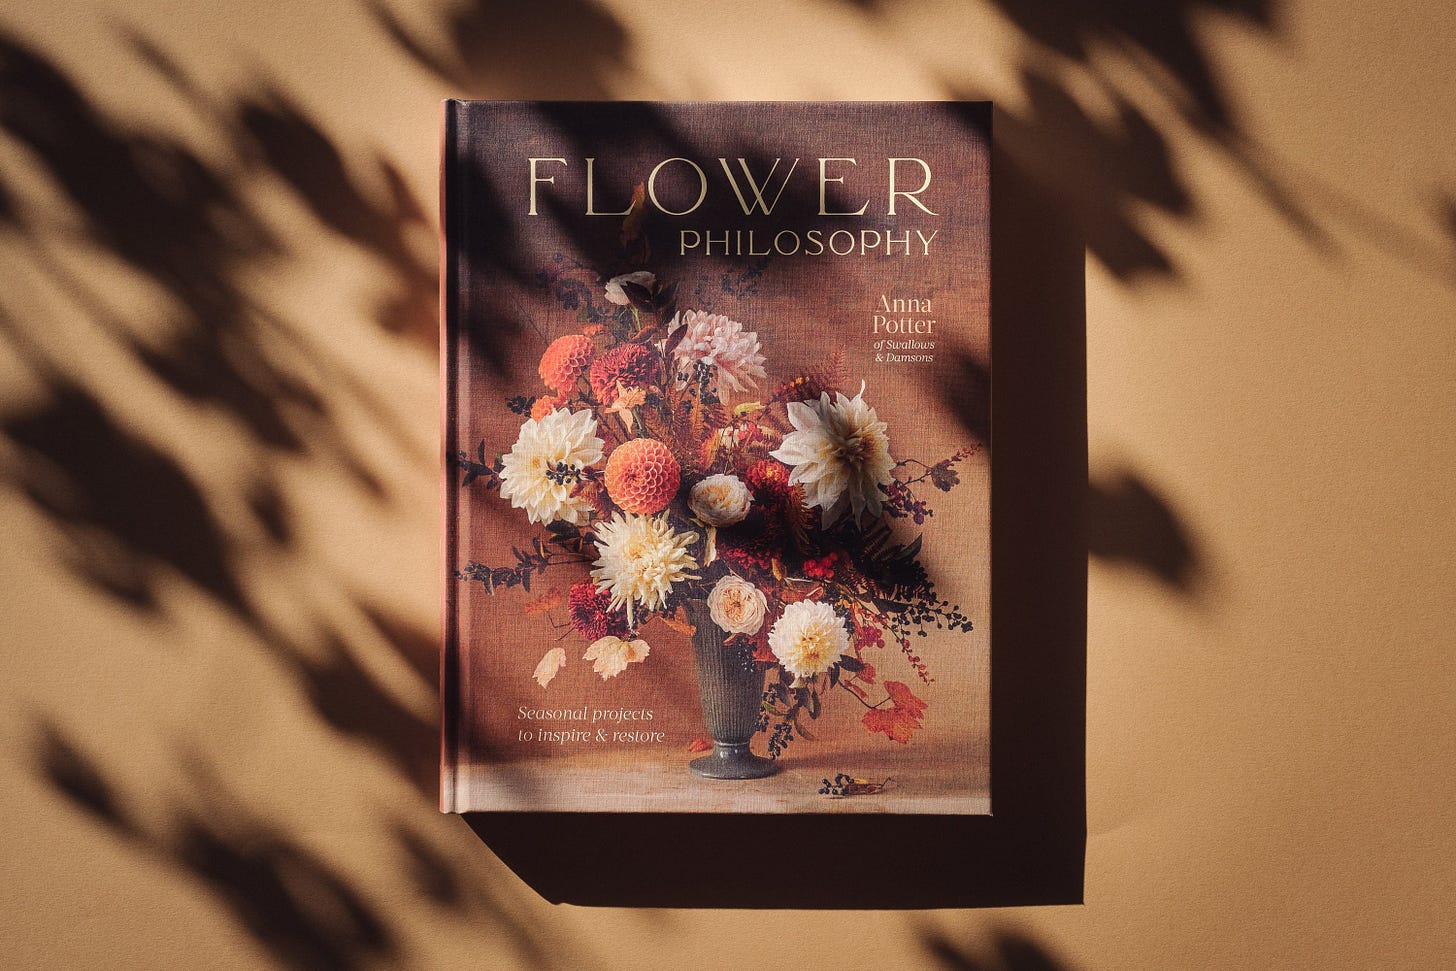 A book titled 'Flower Philosophy' on a paper surface with leaf shadows cast over it. The book cover has a vase with an arrangement of autumn flowers.